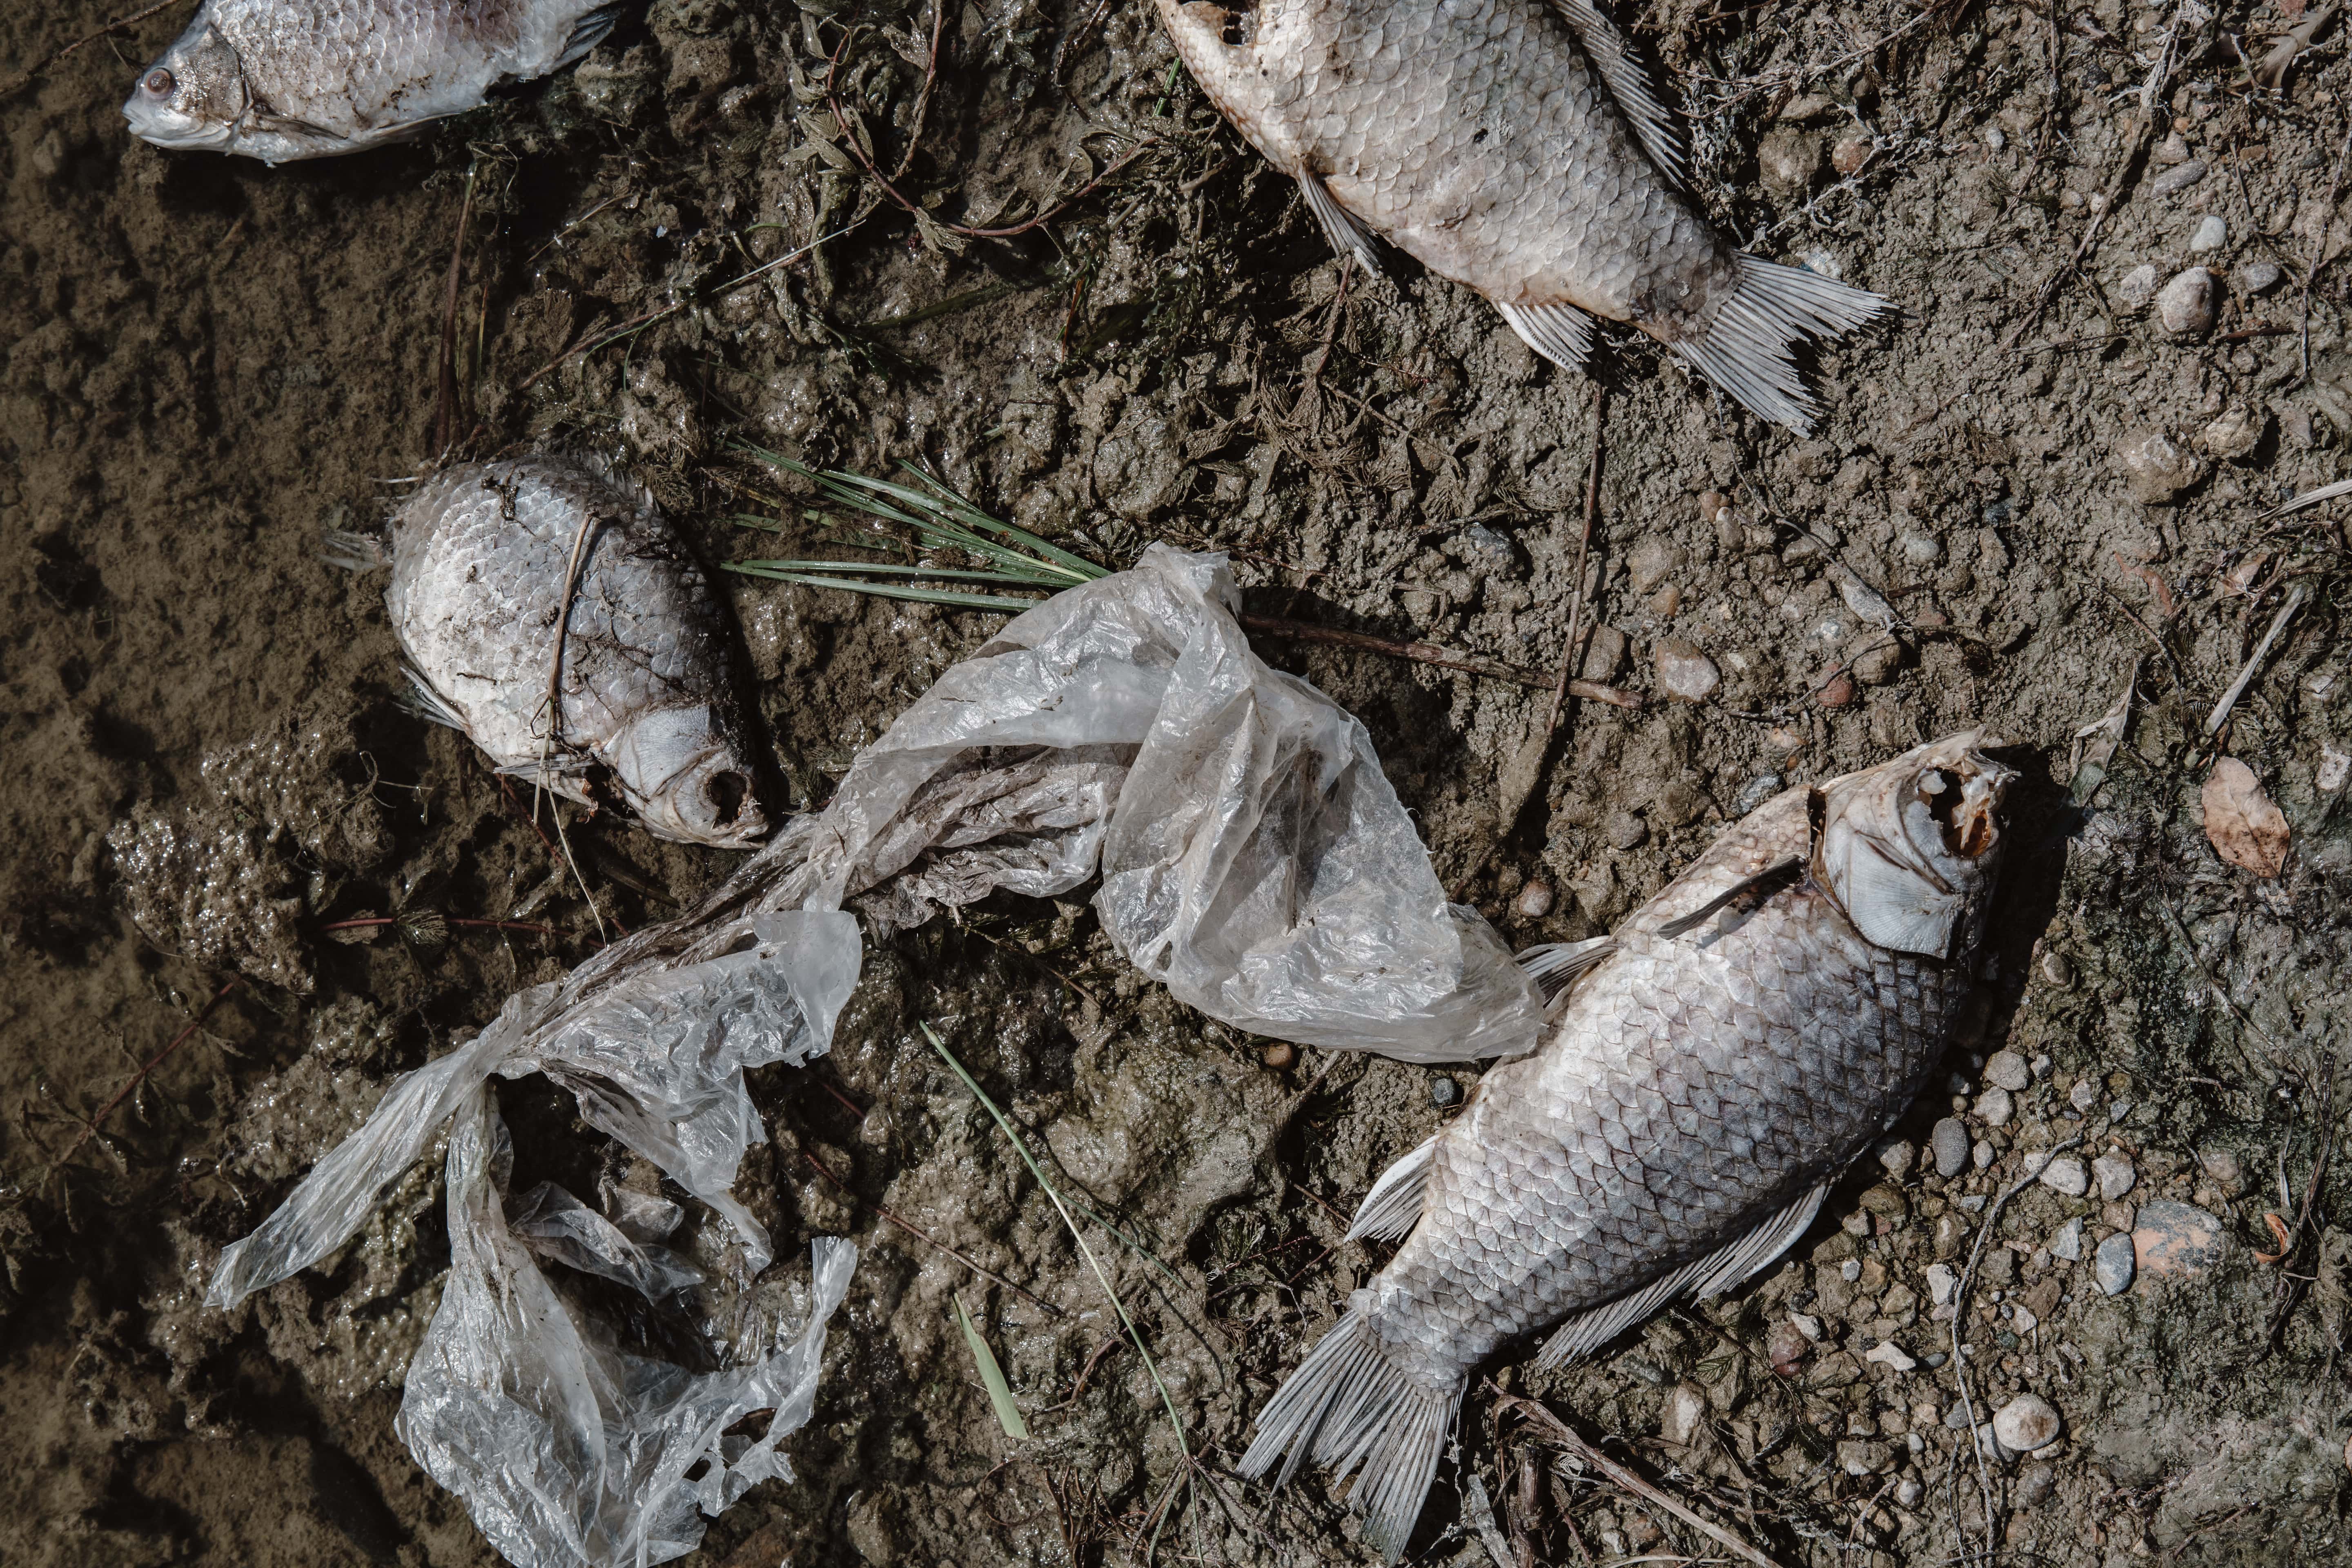 Millions of dead fish drifted up on the shore of the polluted lake in Lebanon